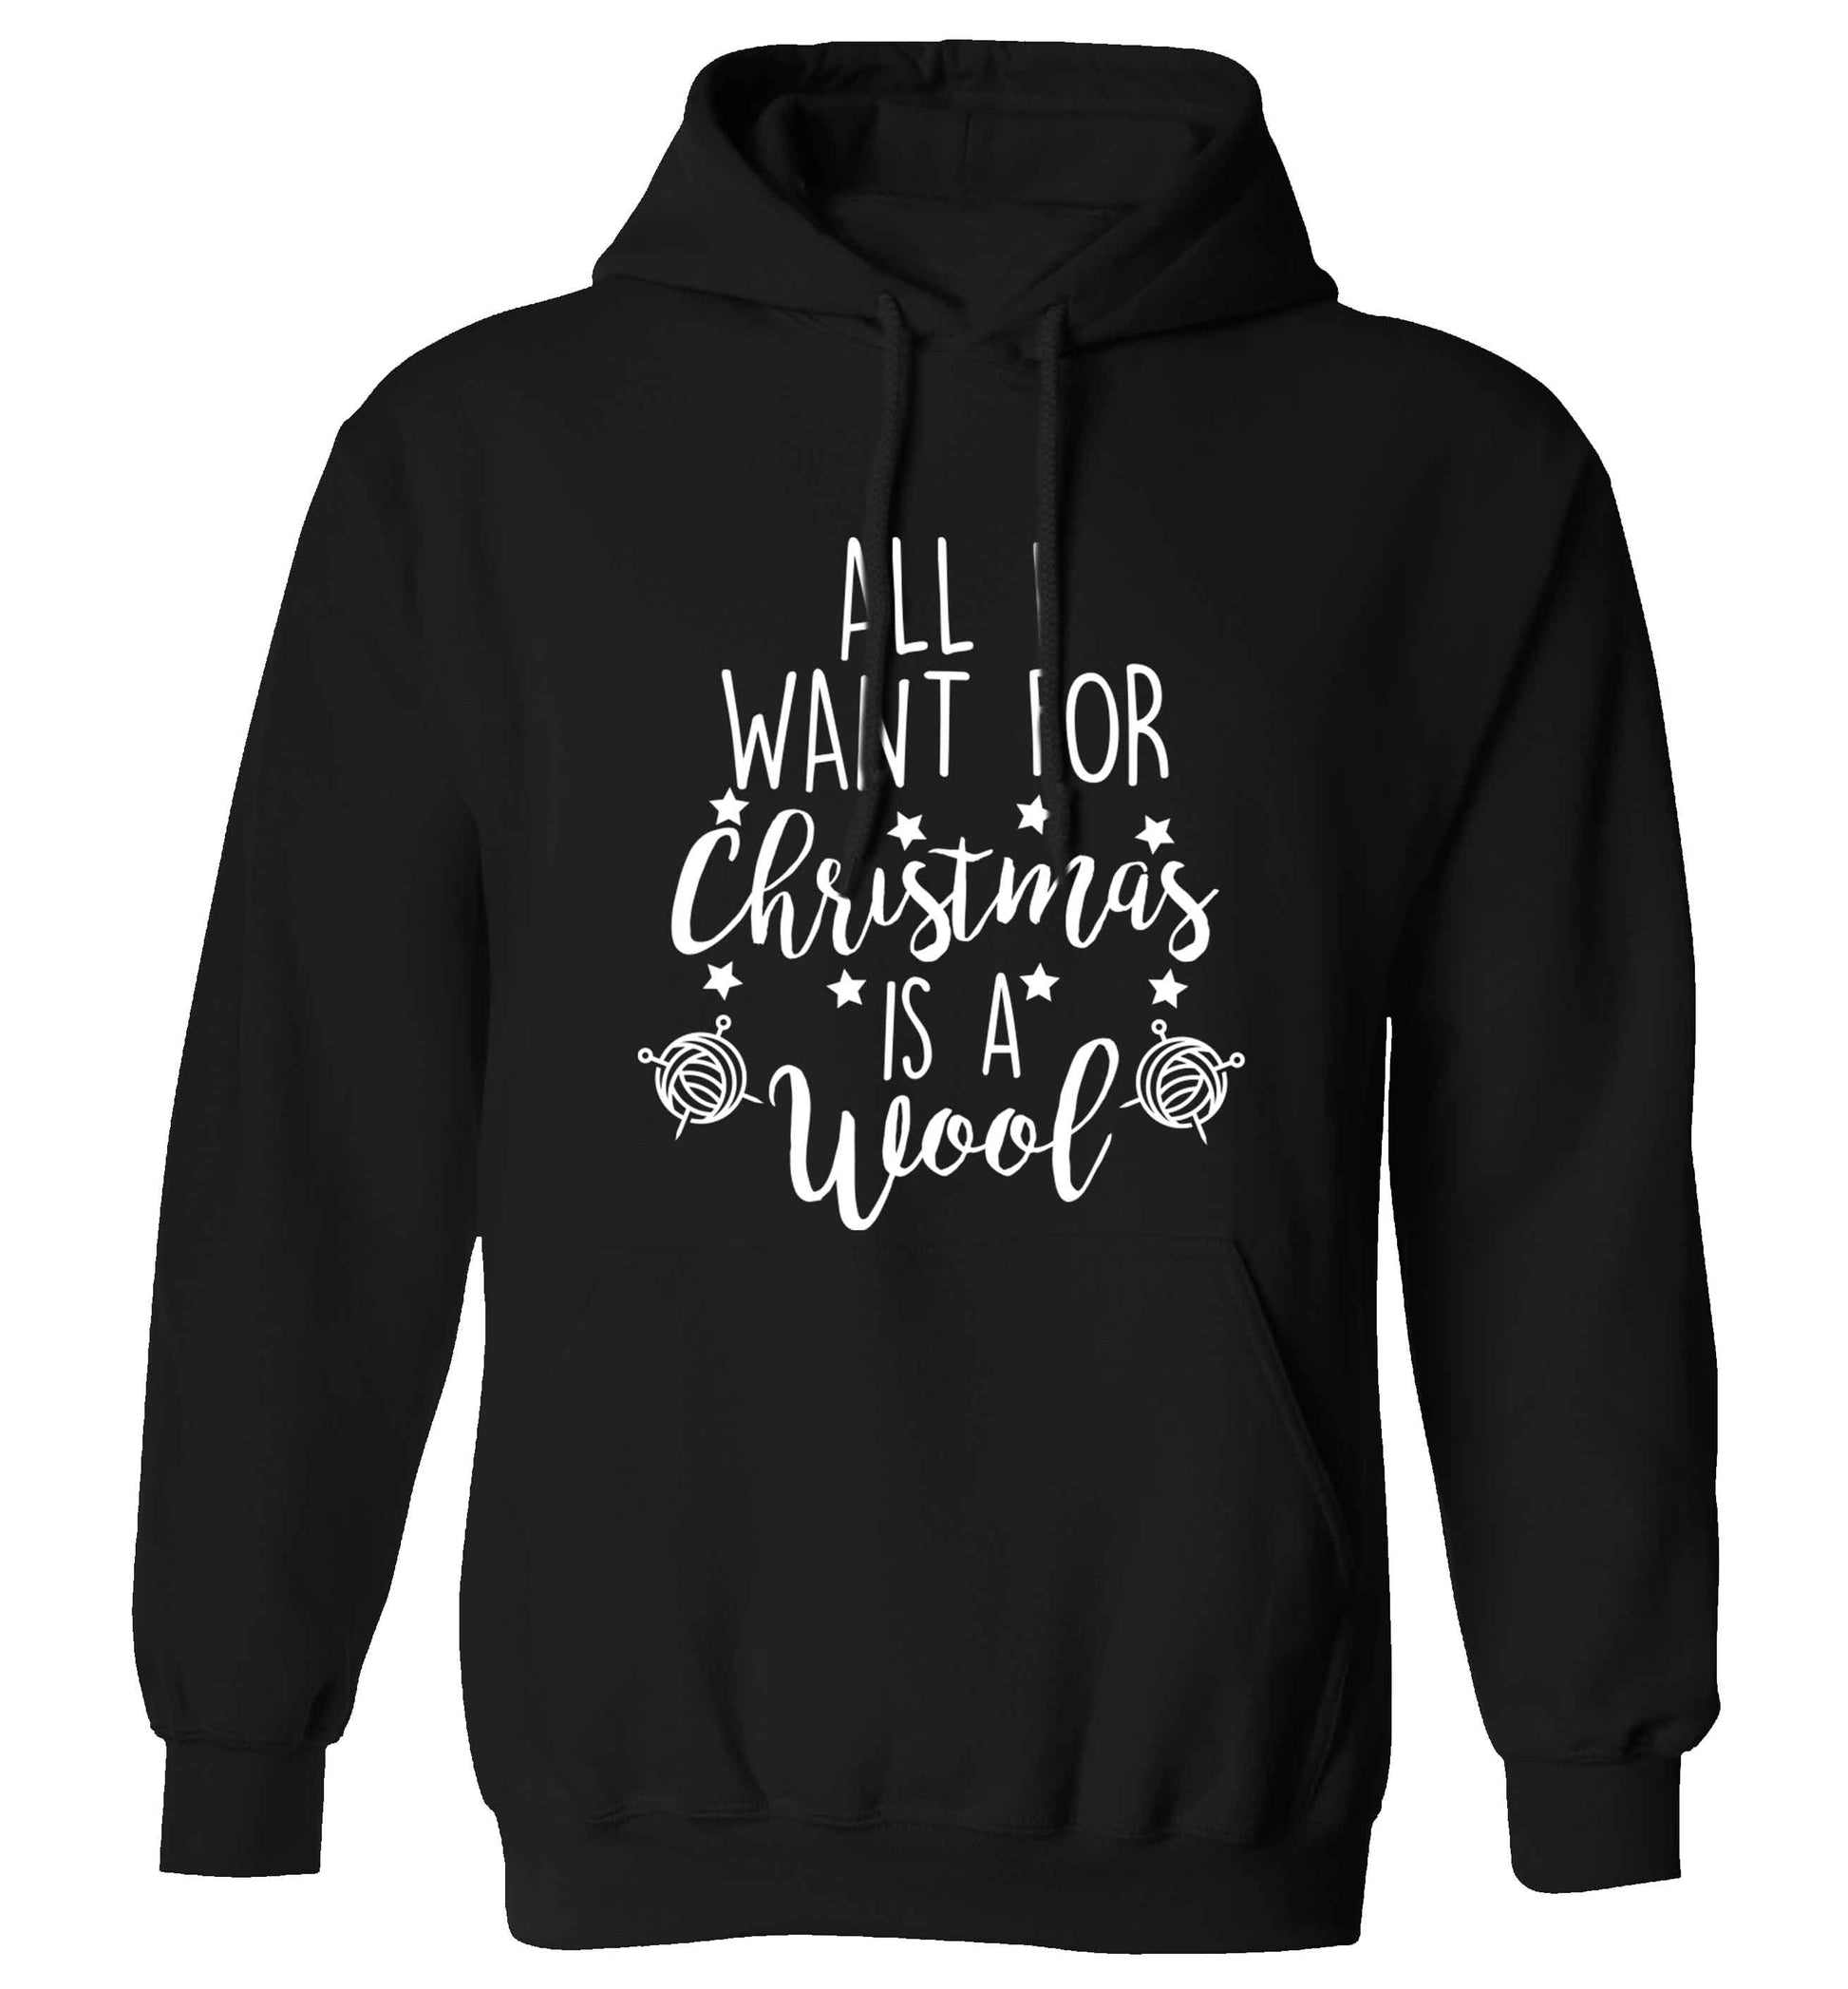 All I want for Christmas is wool! adults unisex black hoodie 2XL